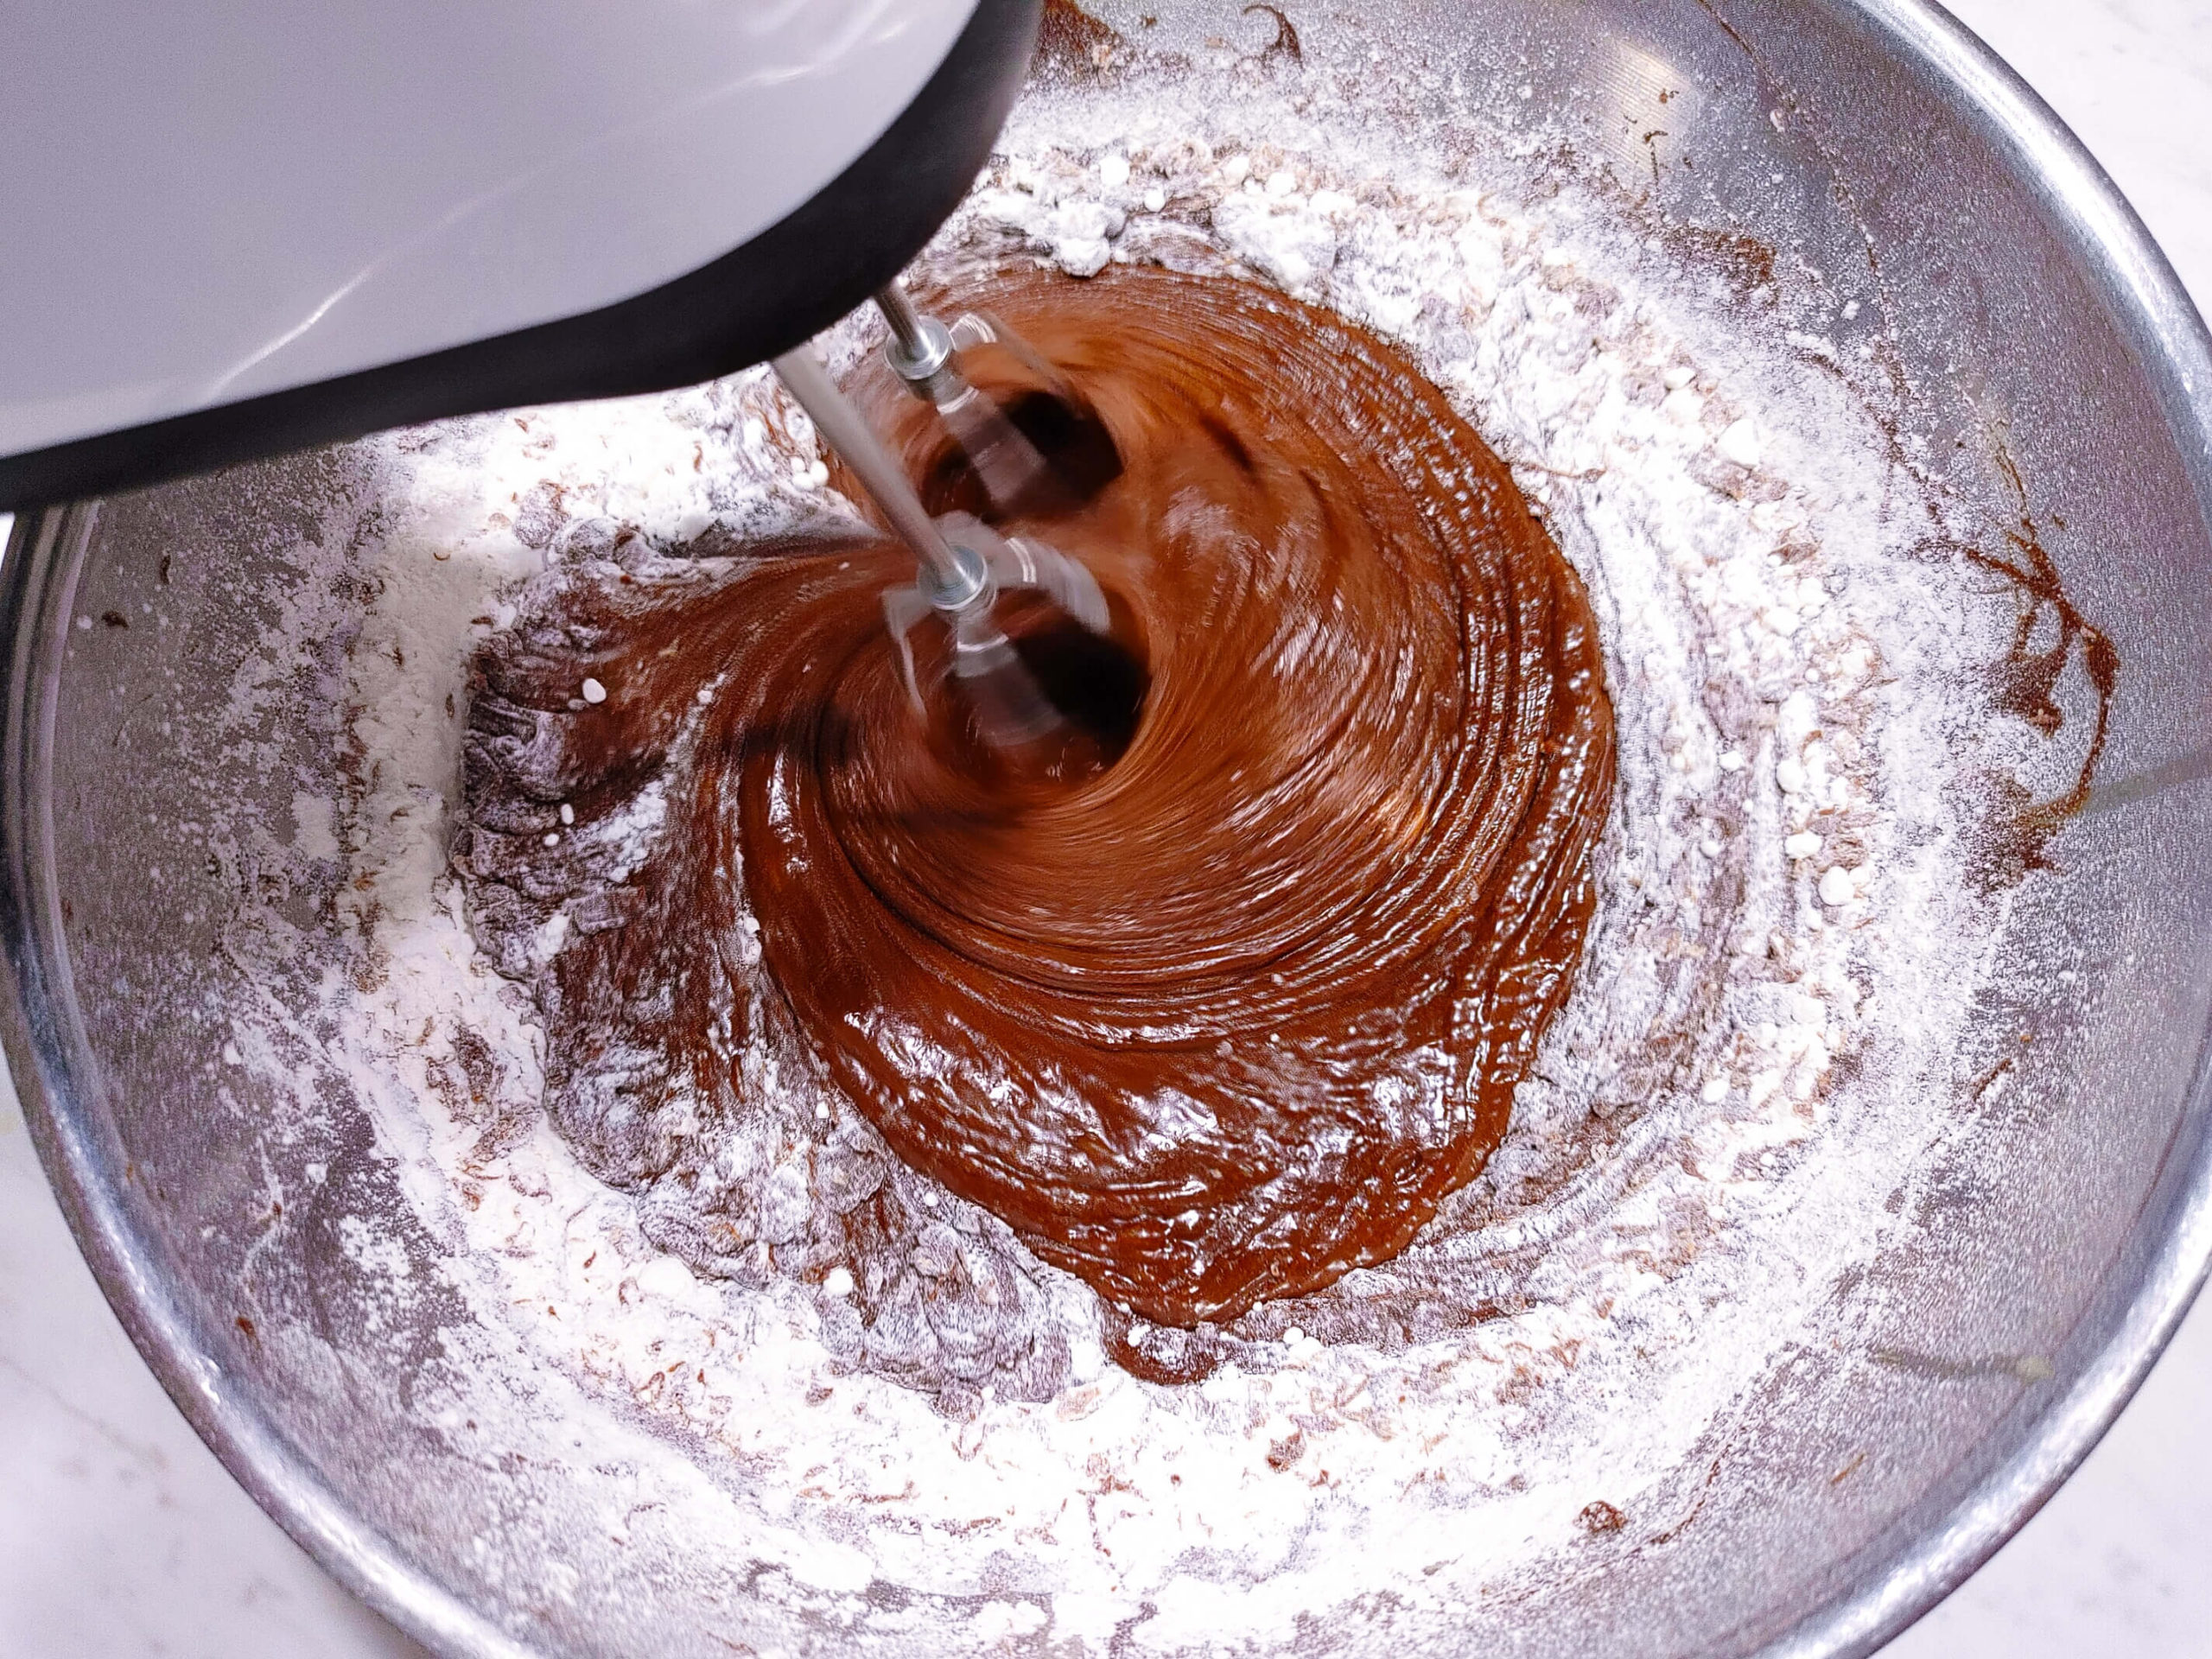 COMBINE THE FLOUR AND CHOCOLATE INGREDIENTS TOGETHER